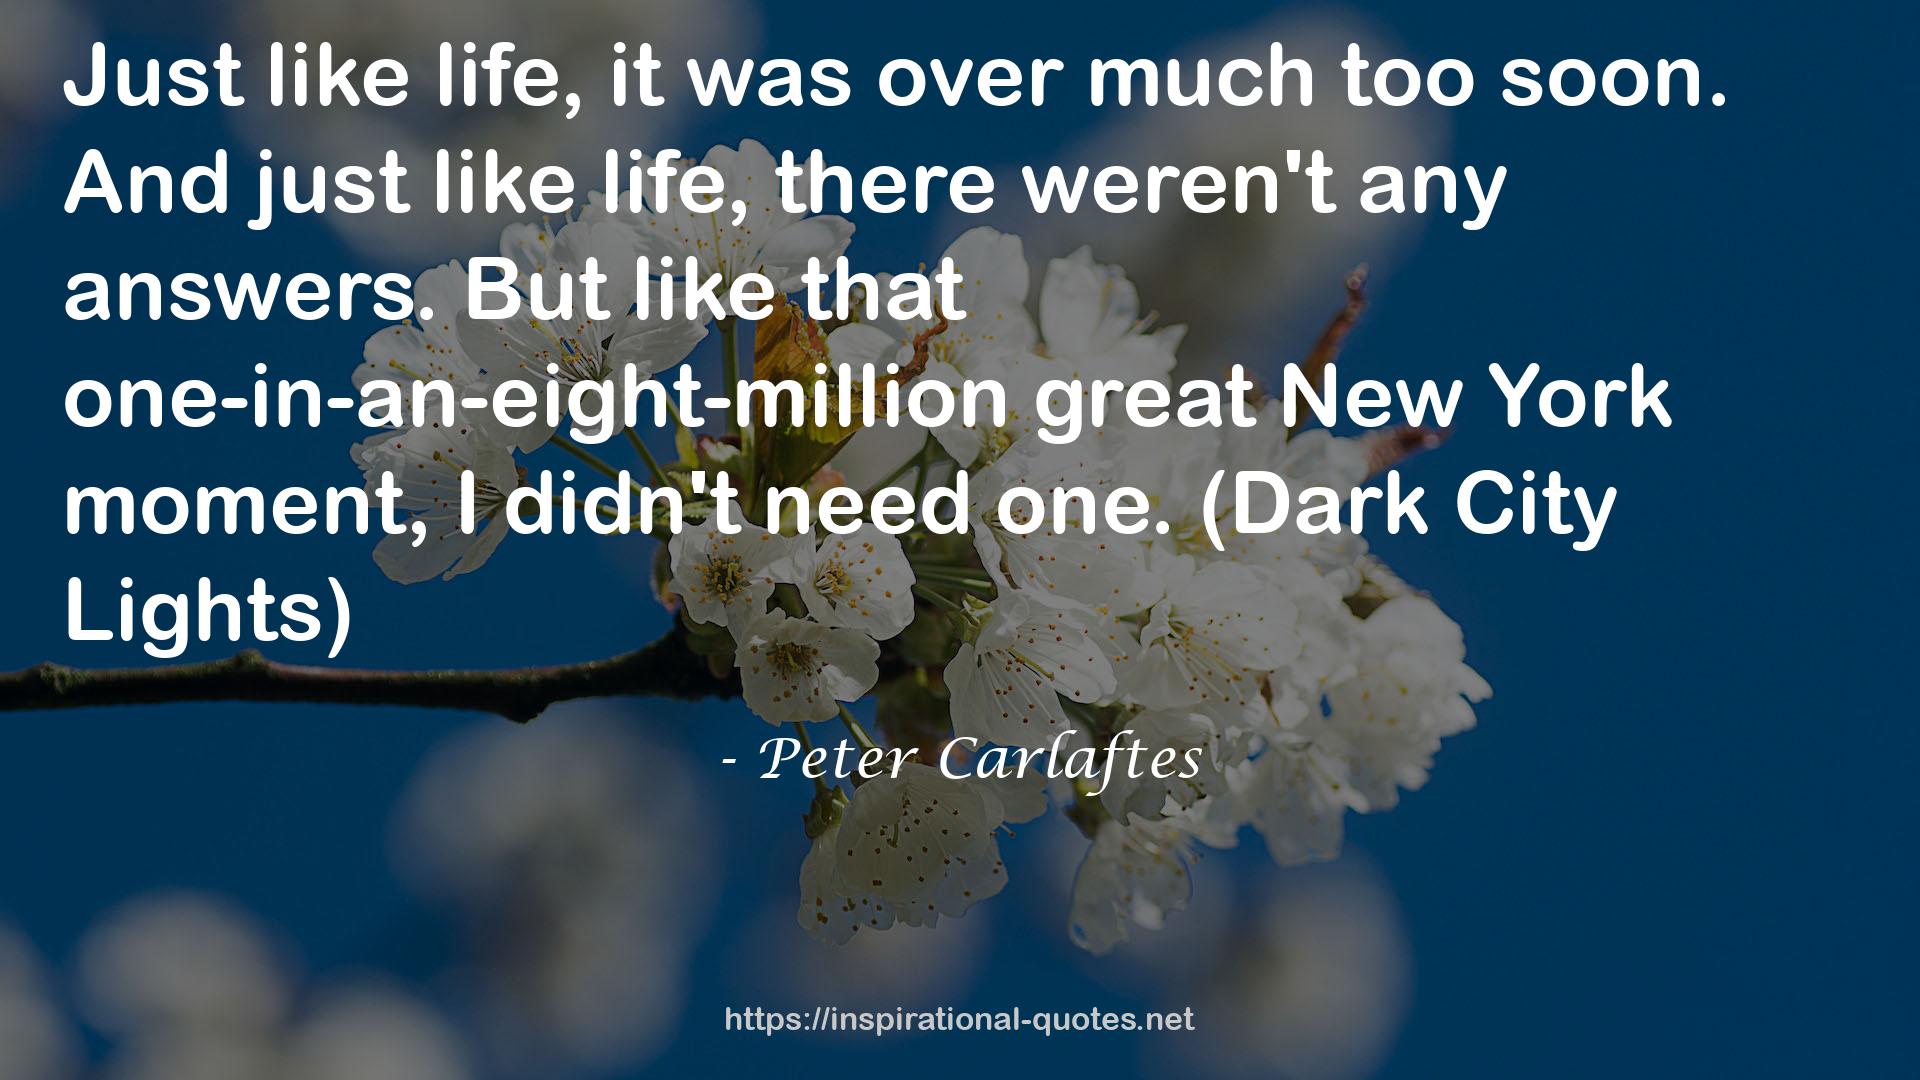 Peter Carlaftes QUOTES